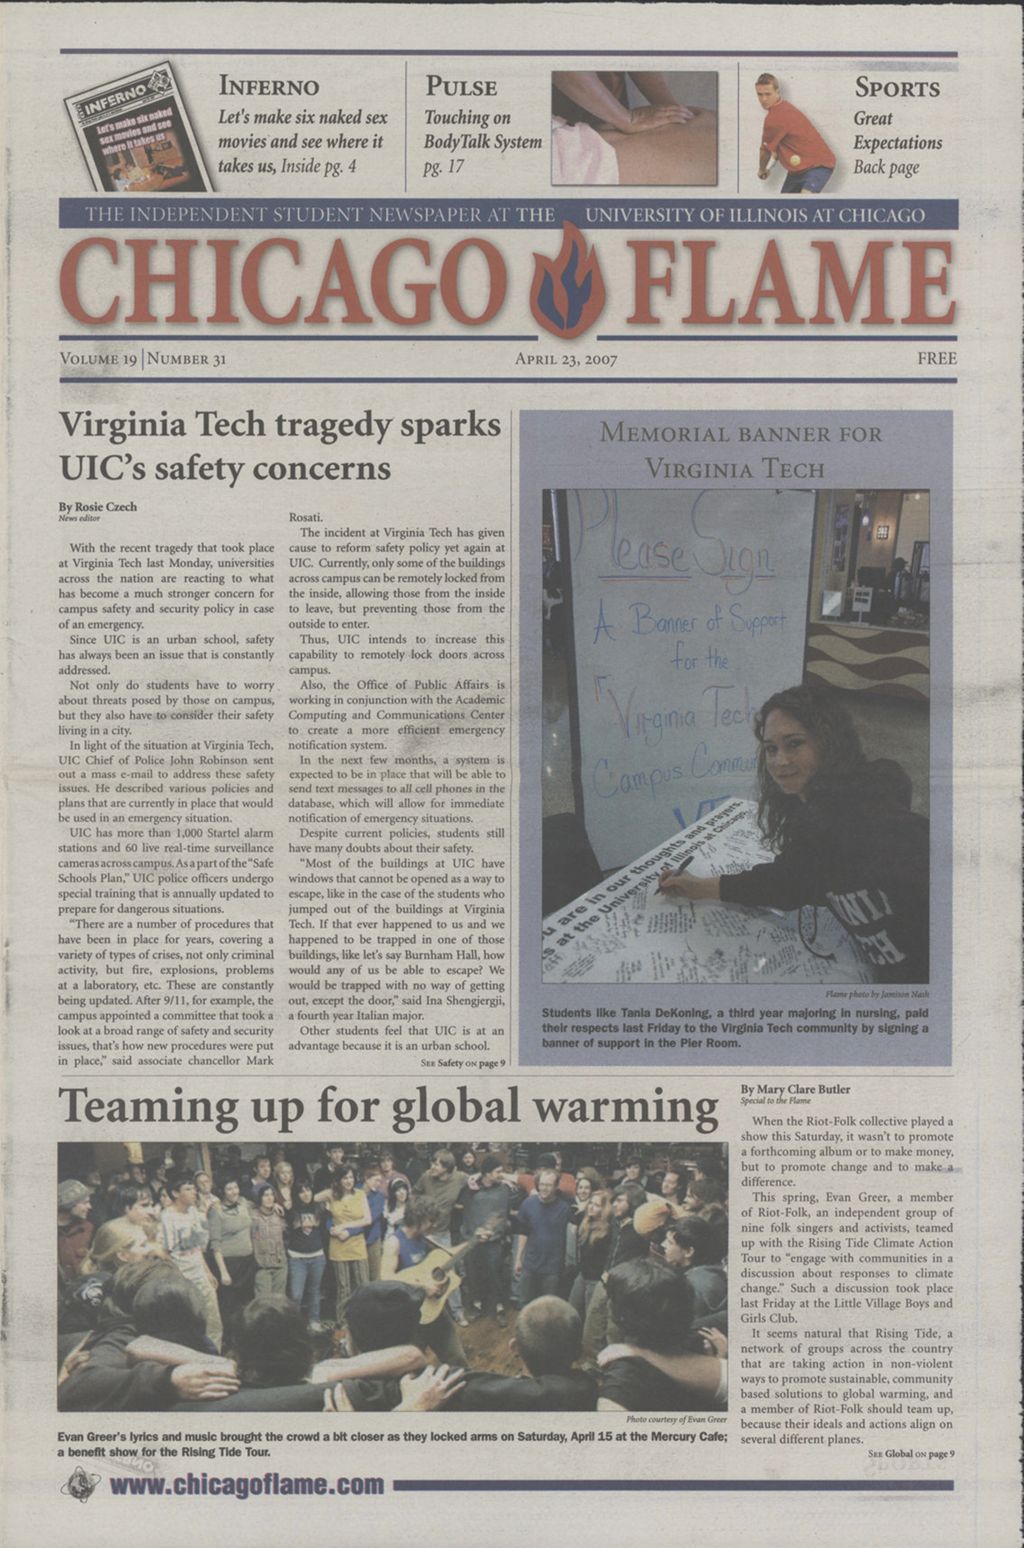 Chicago Flame (April 23, 2007)